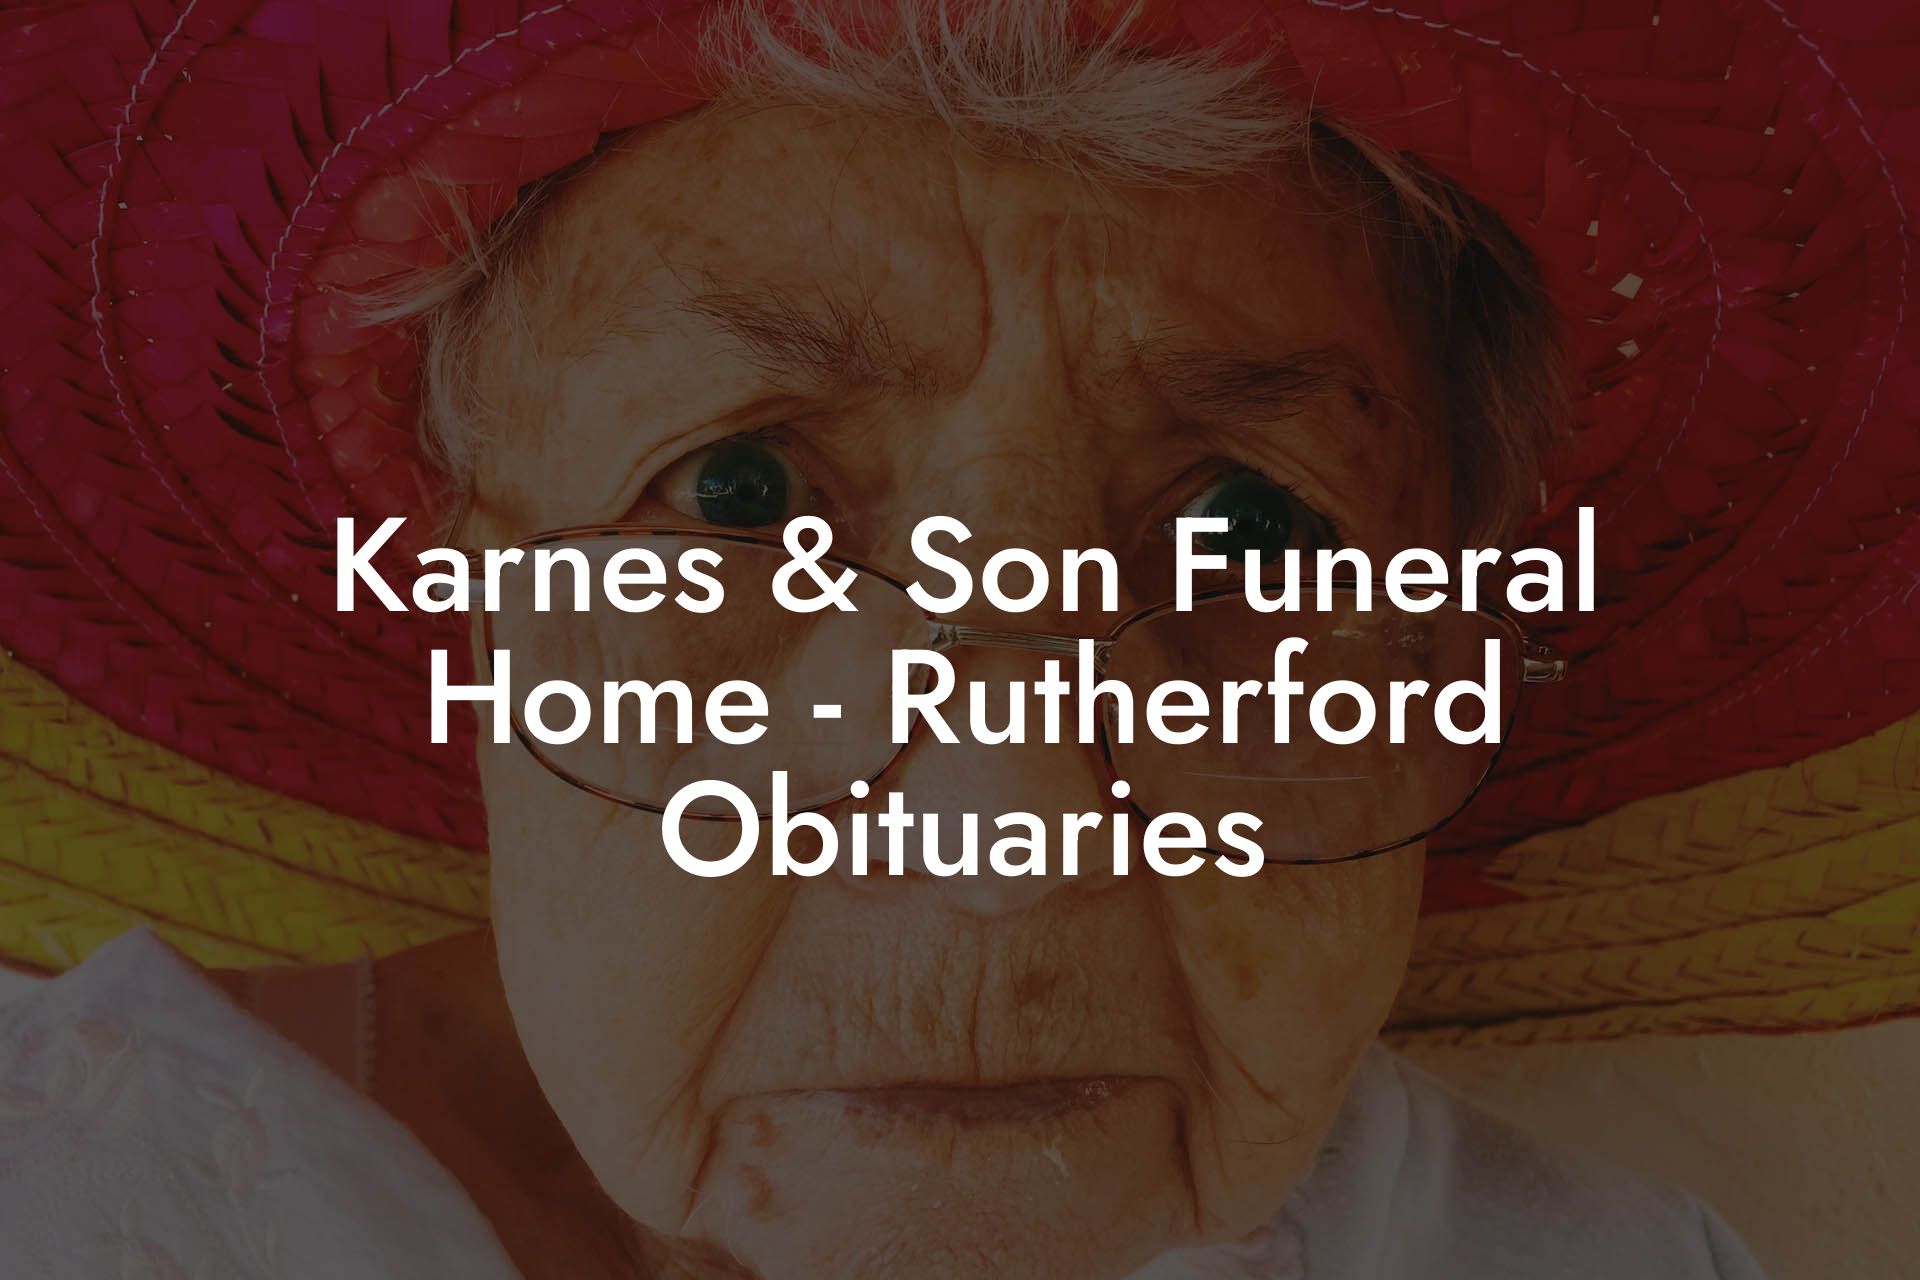 Karnes & Son Funeral Home - Rutherford Obituaries